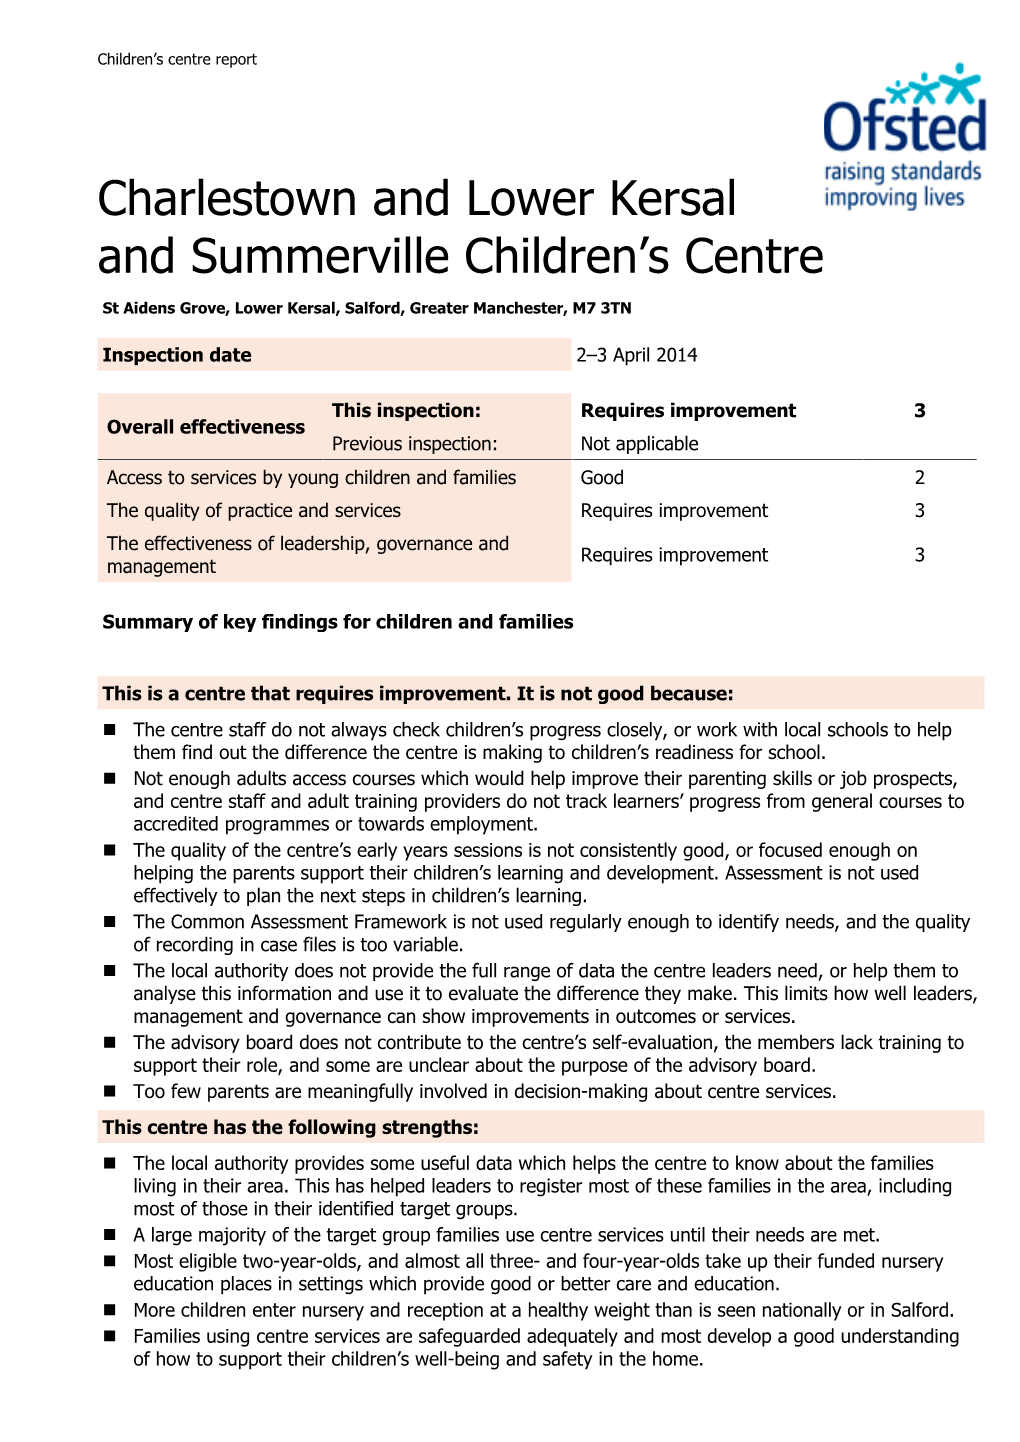 Charlestown and Lower Kersal and Summerville Children's Centre